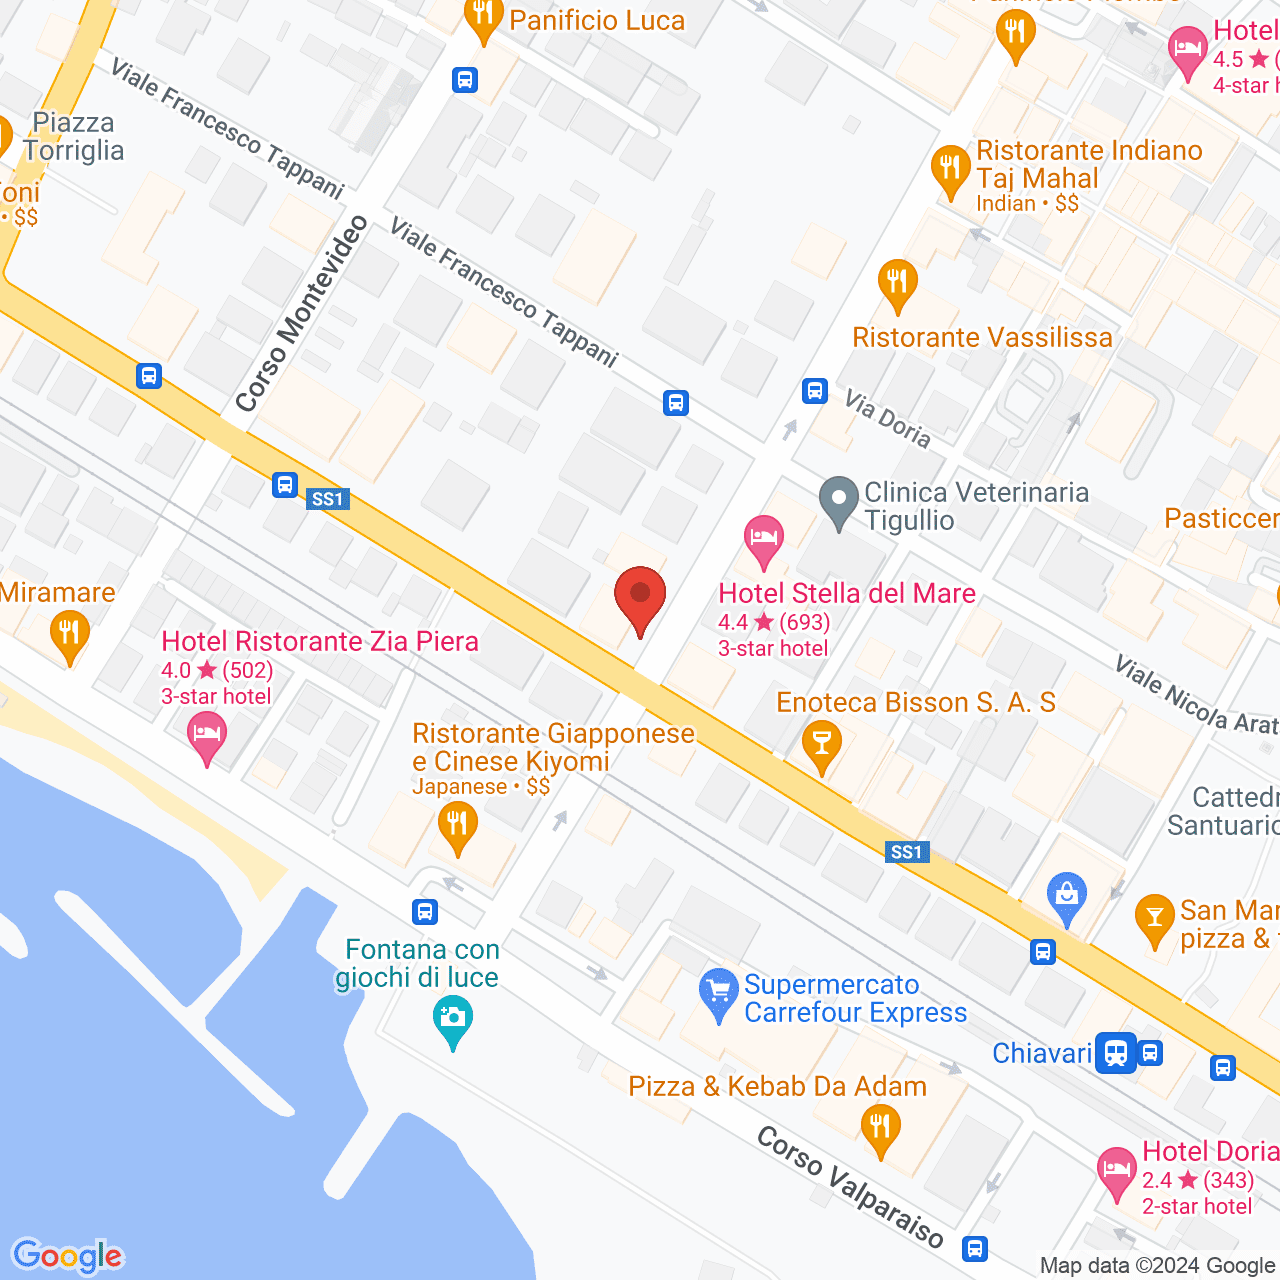 https://maps.googleapis.com/maps/api/staticmap?zoom=10&maptype=hybrid&scale=4&center=44.3168416,9.3199822&markers=color:red%7C%7C44.3168416,9.3199822&size=1000x1000&key=AIzaSyAQg6Liu52-a7wn17F9B-5c4QmJ9kTO3Mo